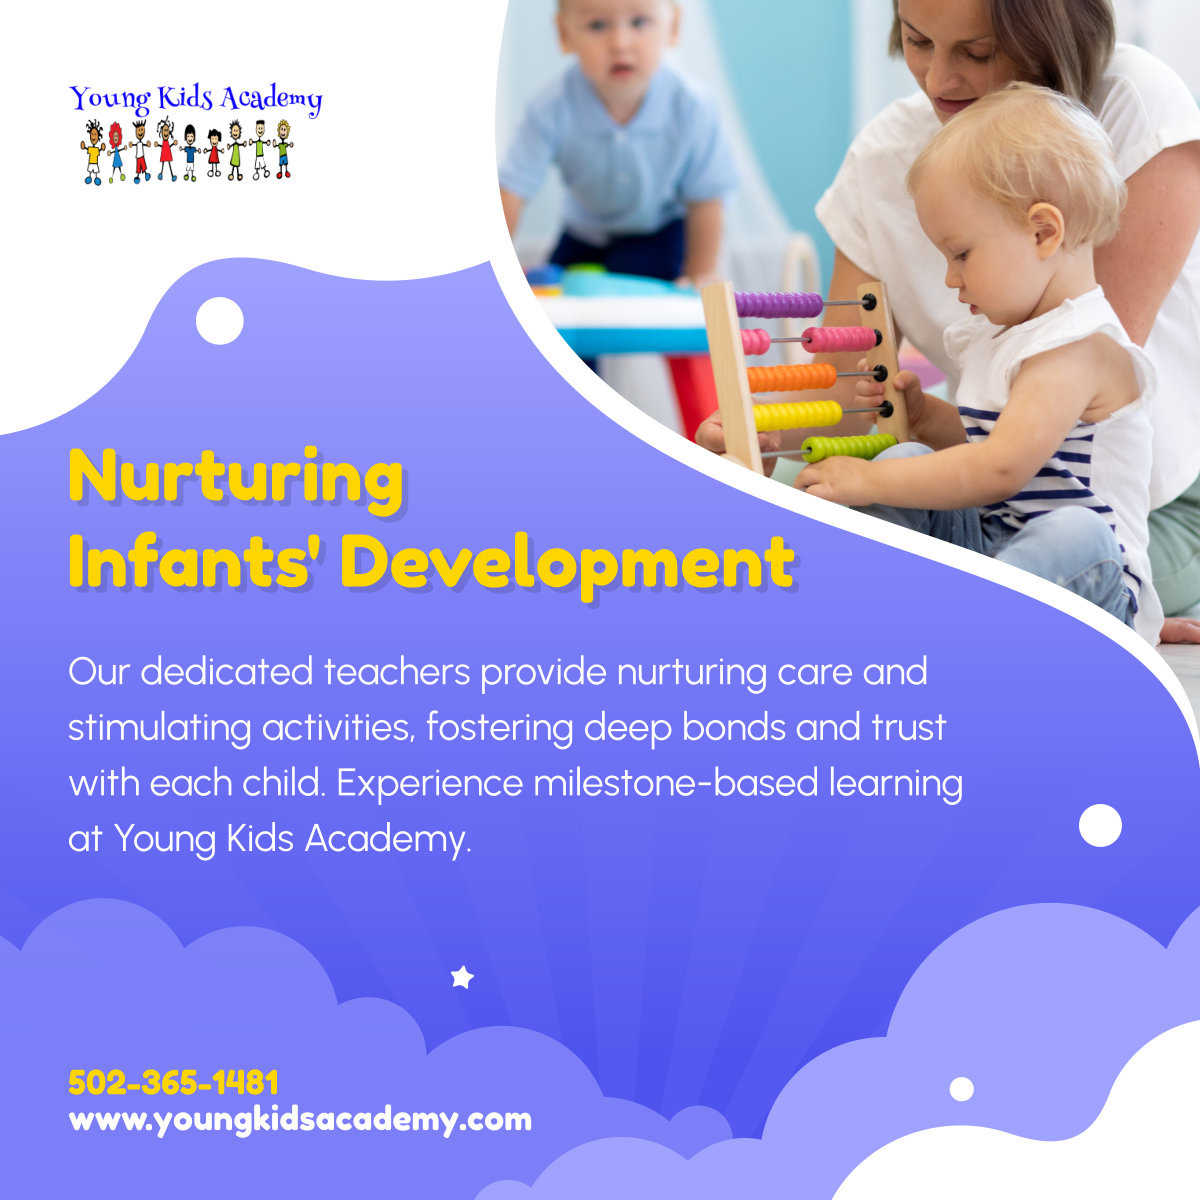 Discover how our nurturing environment and milestone-based curriculum empower infants to thrive and develop at Young Kids Academy. 

#LouisvilleKY #ChildCare #InfantDevelopment